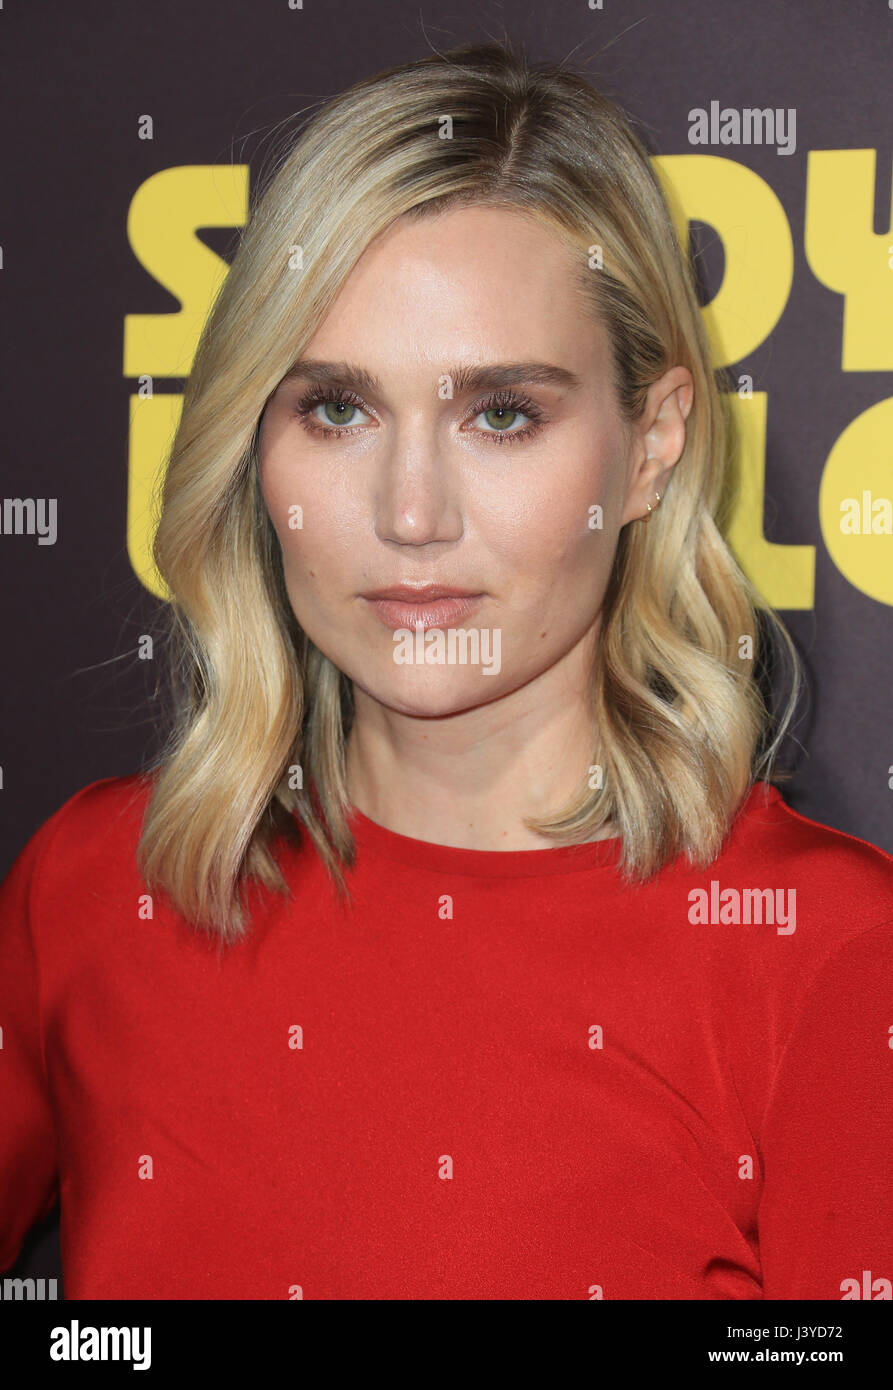 Premiere of Netflix's 'Sandy Wexler' - Arrivals  Featuring: Nora Kirkpatrick Where: Hollywood, California, United States When: 06 Apr 2017 Credit: FayesVision/WENN.com Stock Photo